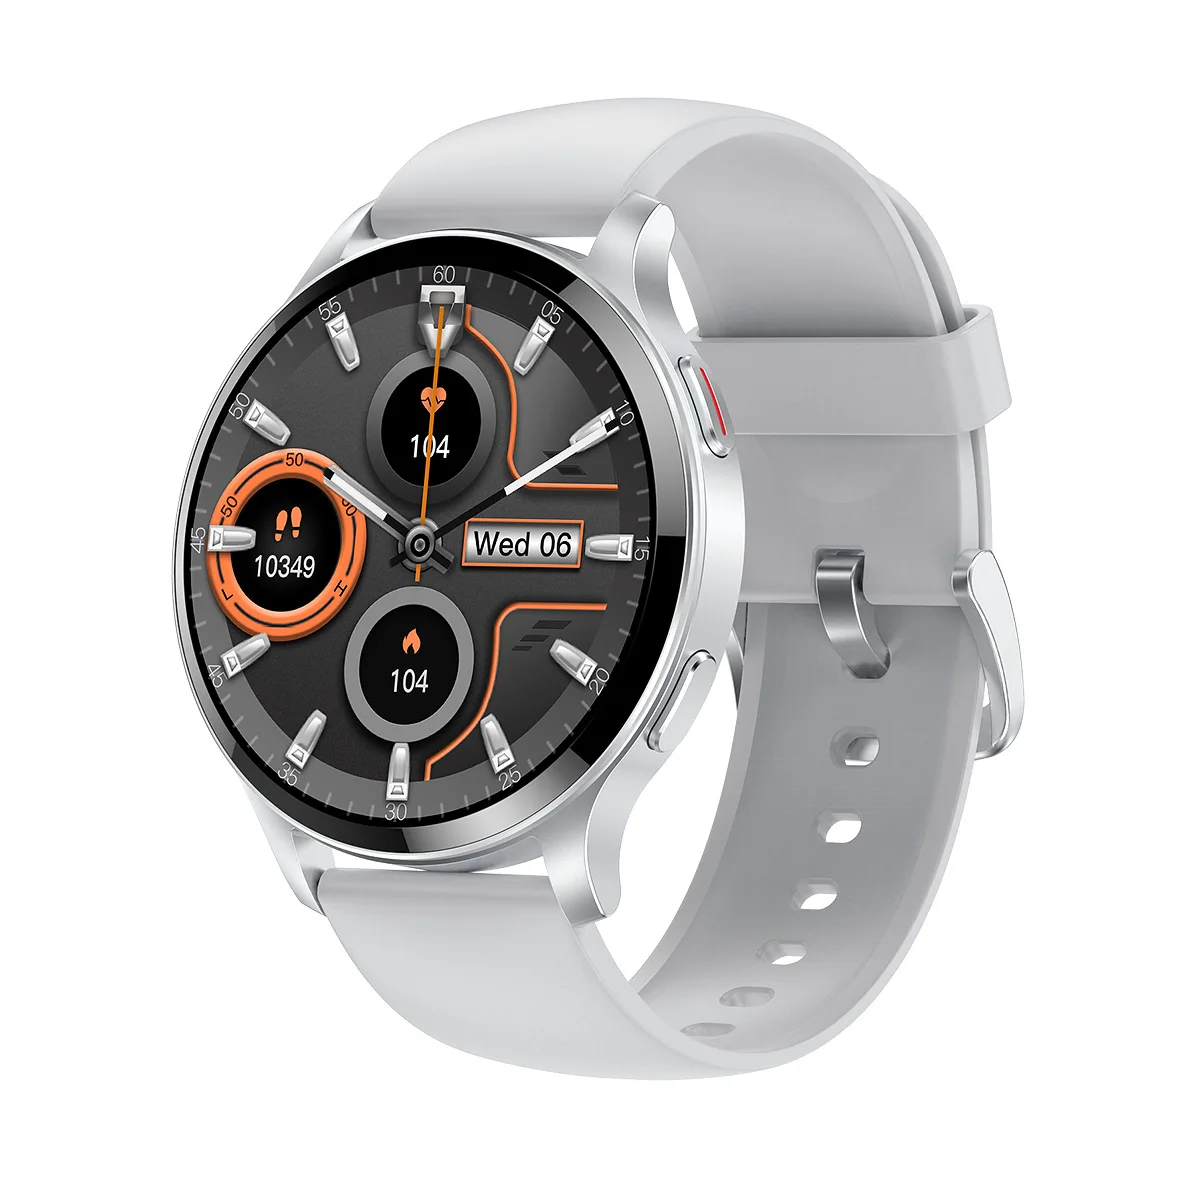 

Factory LW77 Bluetooth Health Monitoring Smart Watch - The Ultimate Fitness Companion for a Healthy Lifestyle